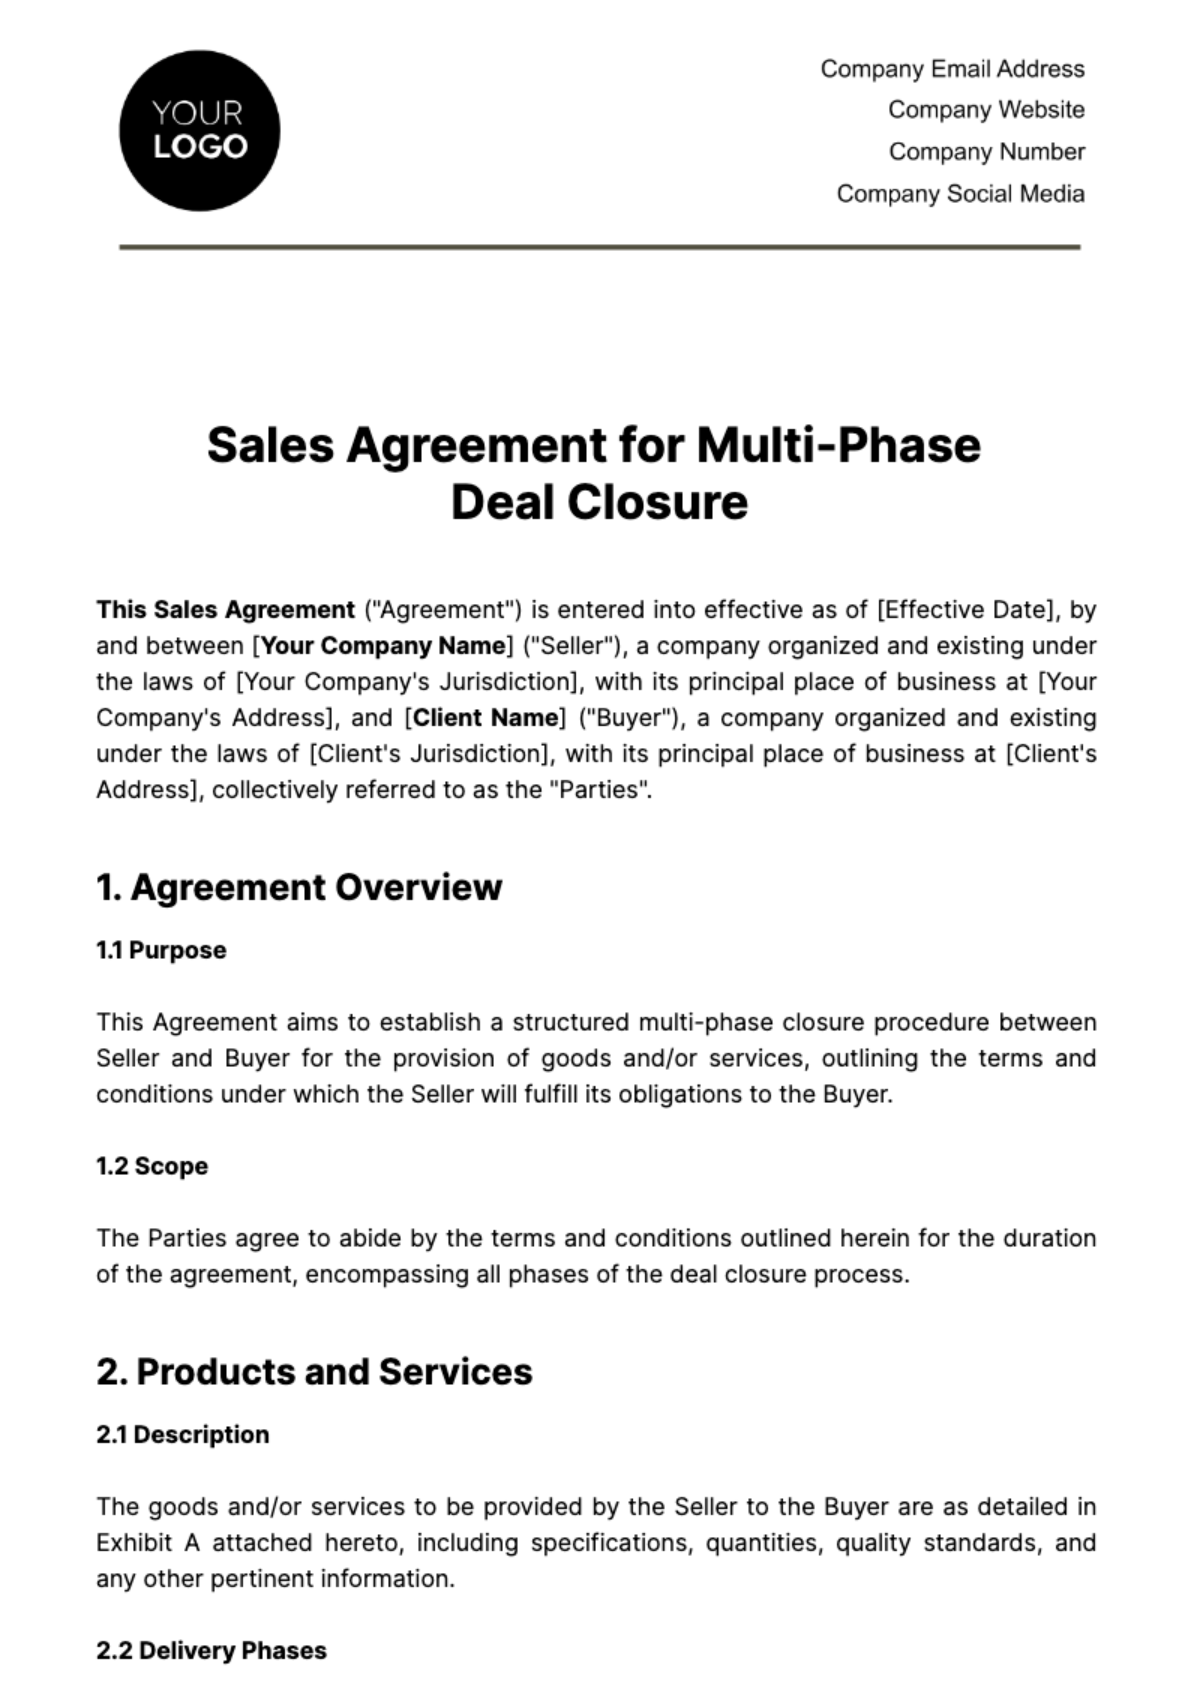 Sales Agreement for Multi-Phase Deal Closure Template